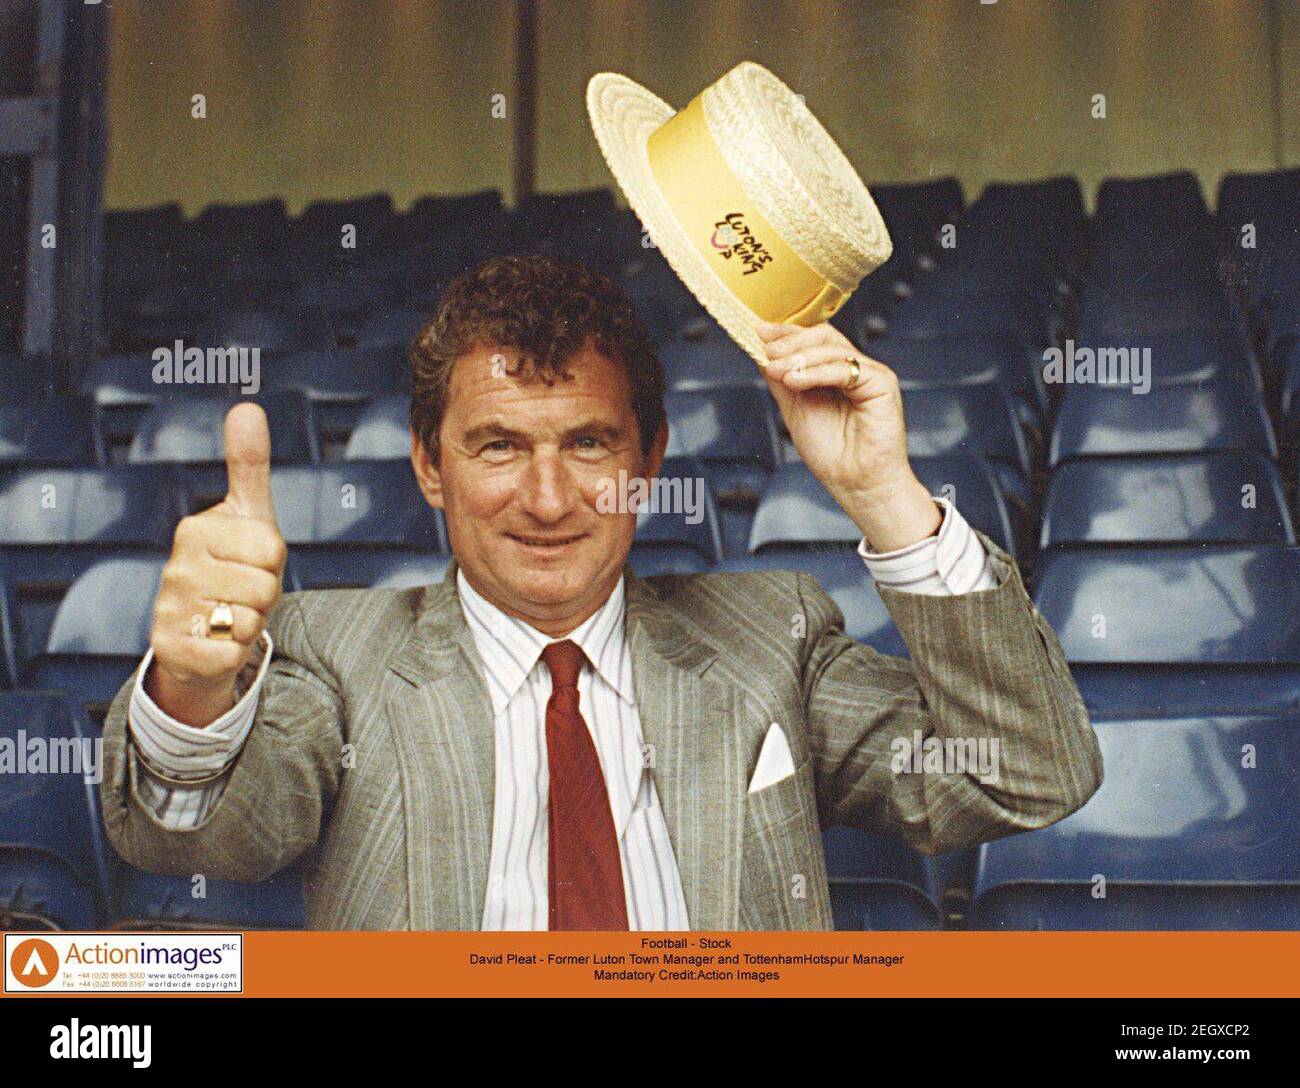 football-stock-david-pleat-former-luton-town-manager-and-tottenham-hotspur-manager-mandatory-creditaction-images-2EGXCP2.jpg